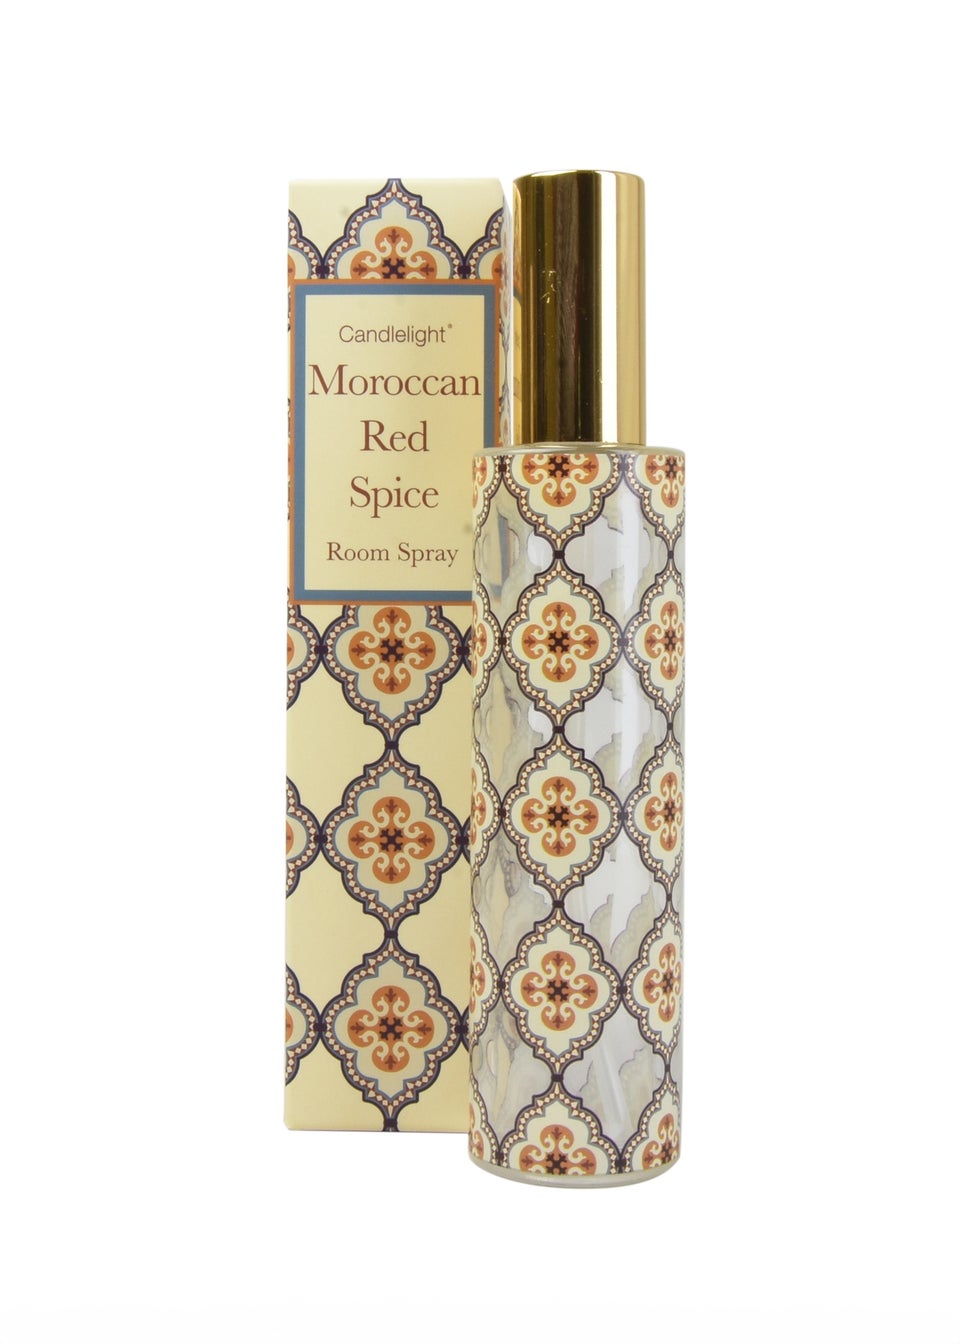 Candlelight Moroccan Red Spice Room Spray (100ml)